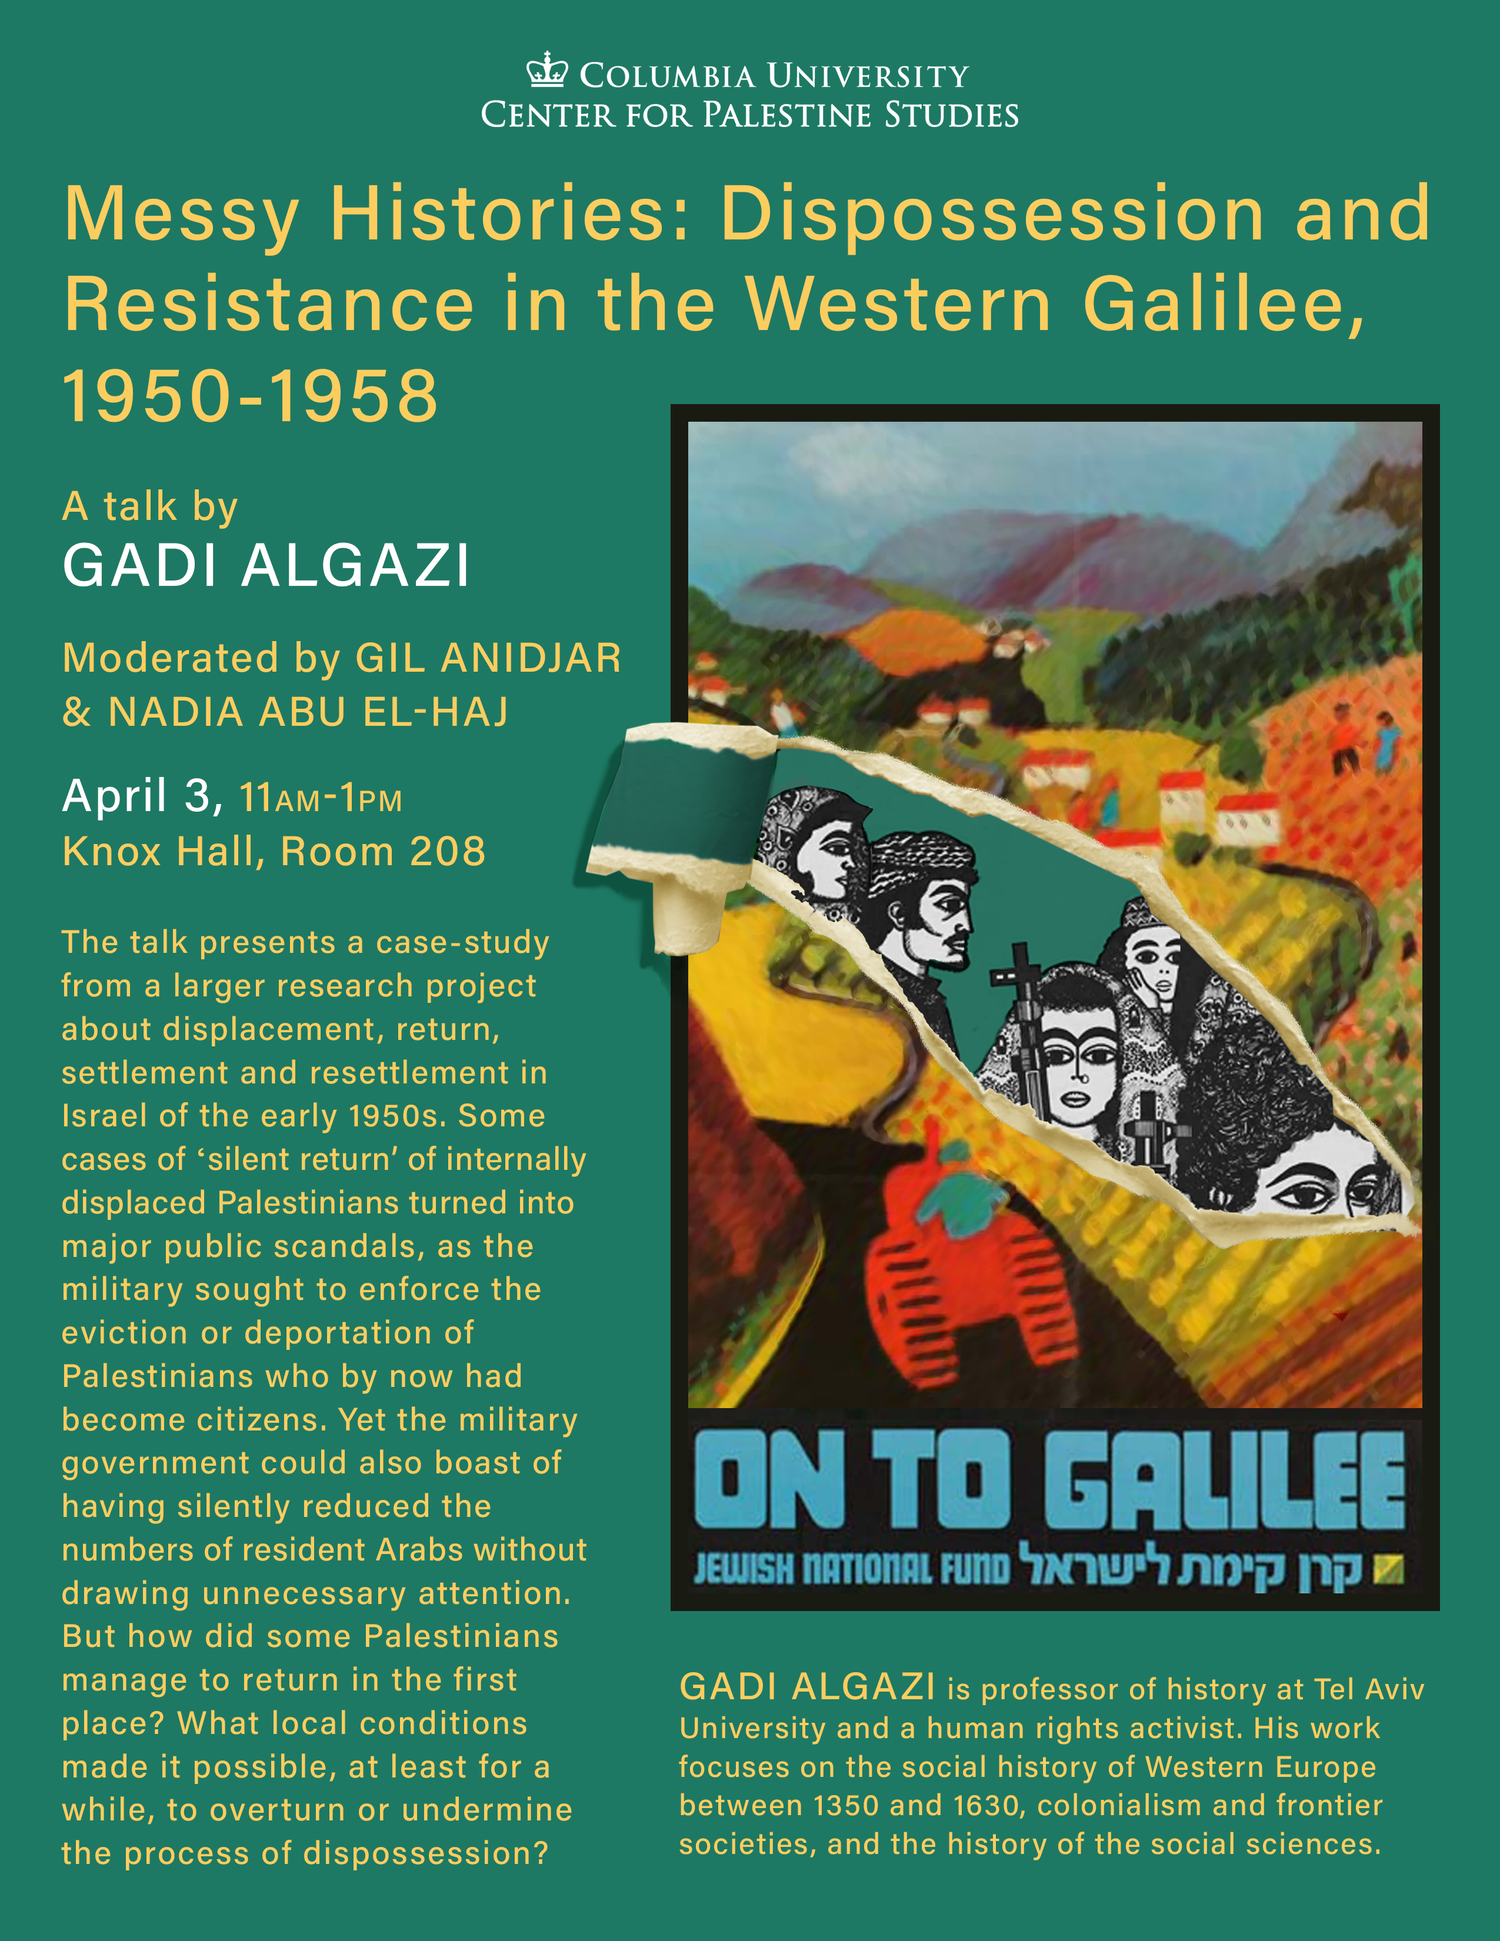 Messy Histories: Dispossession and Resistance in the Western Galilee, 1950-1958